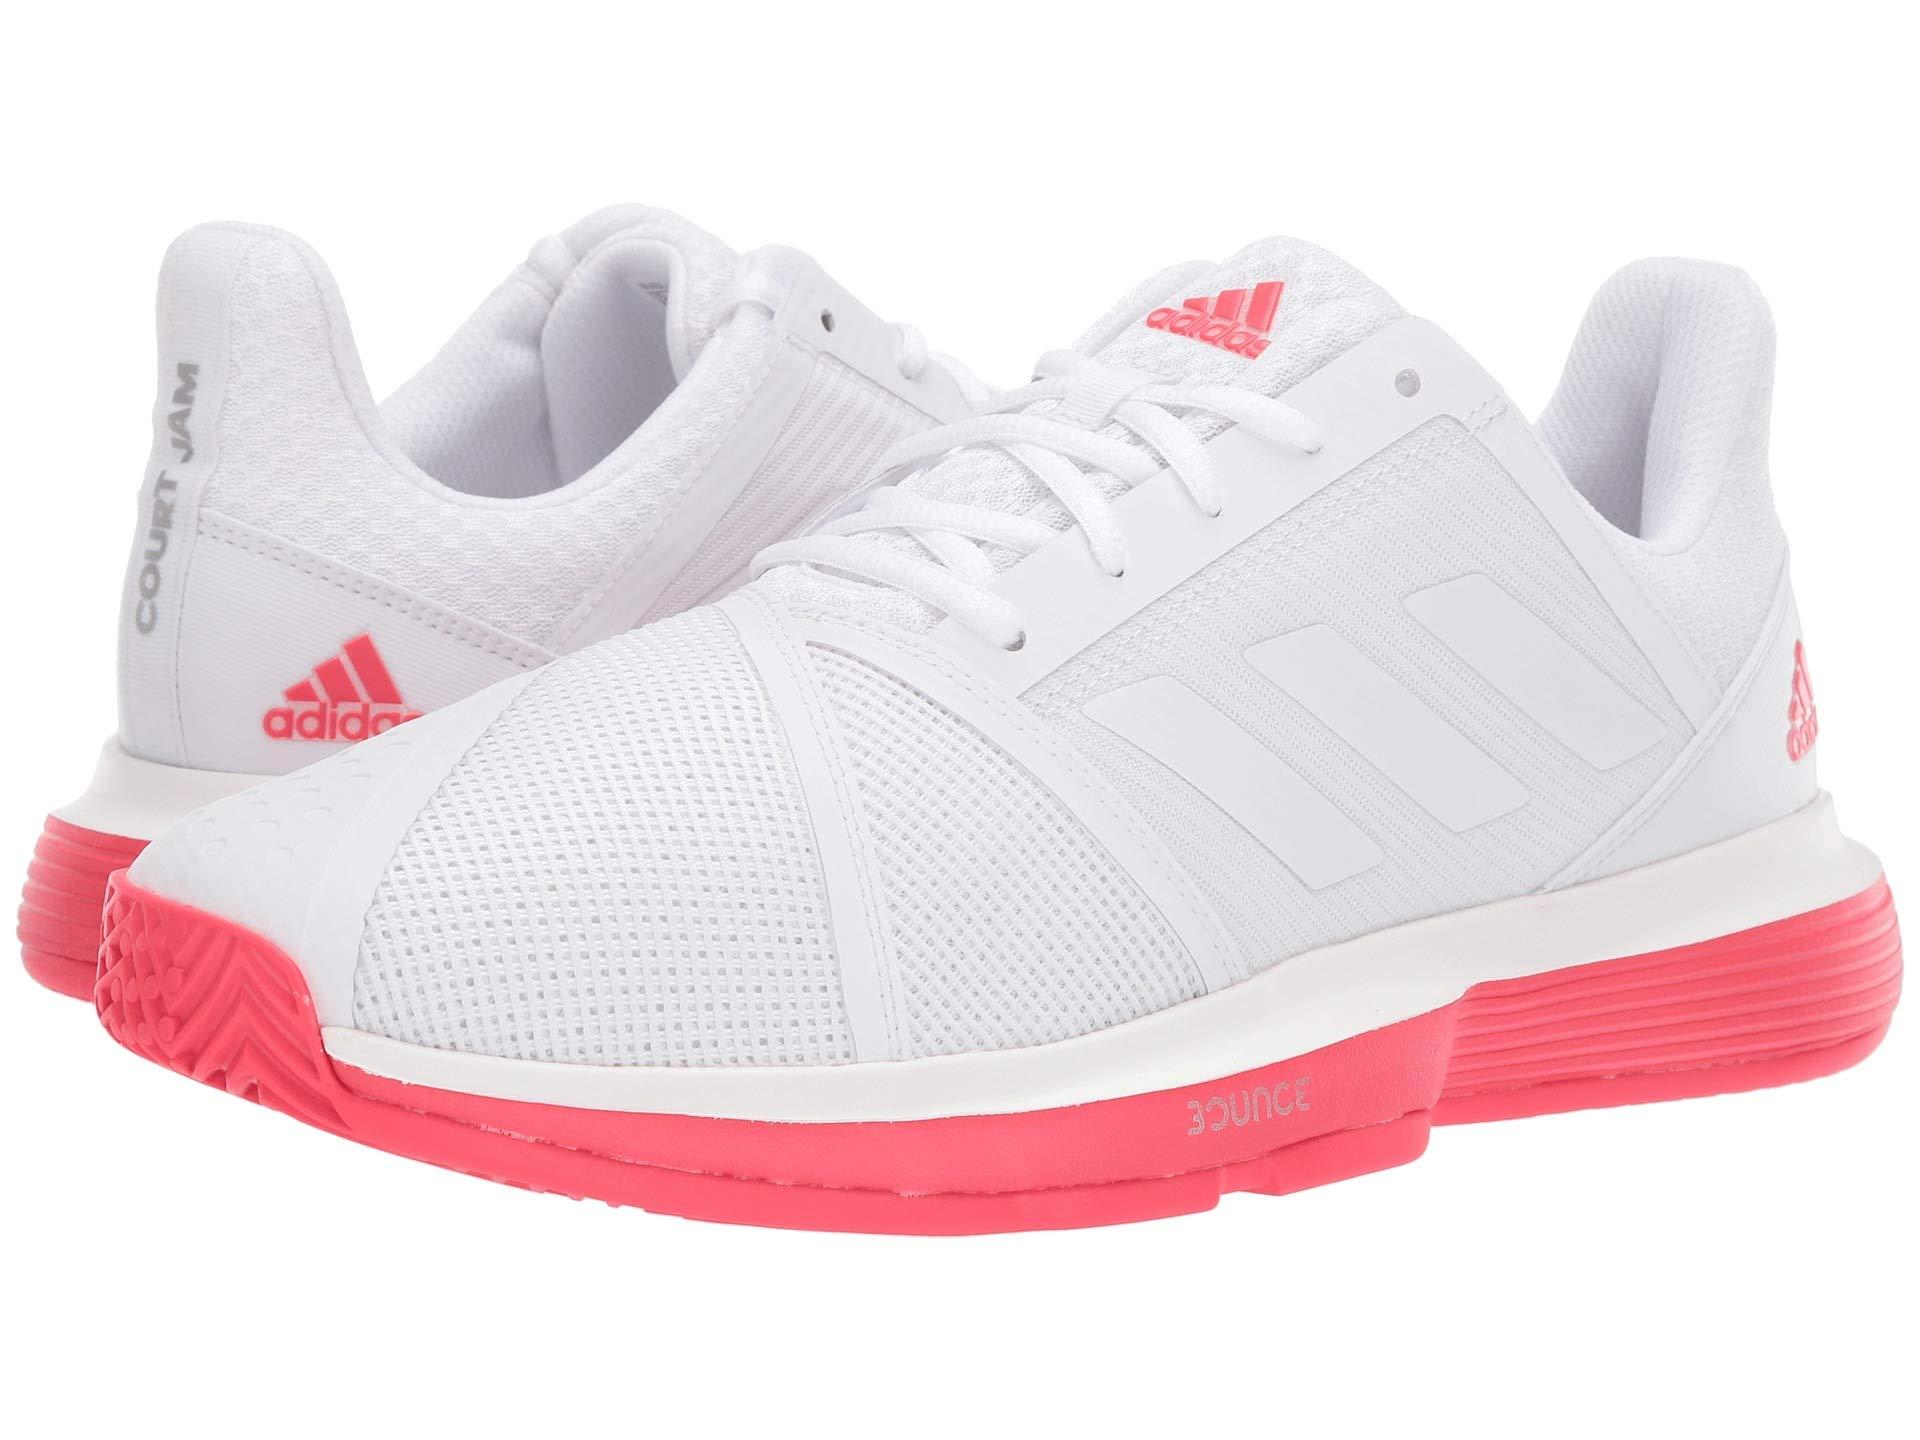 adidas Synthetic Courtjam Bounce in White for Men - Lyst